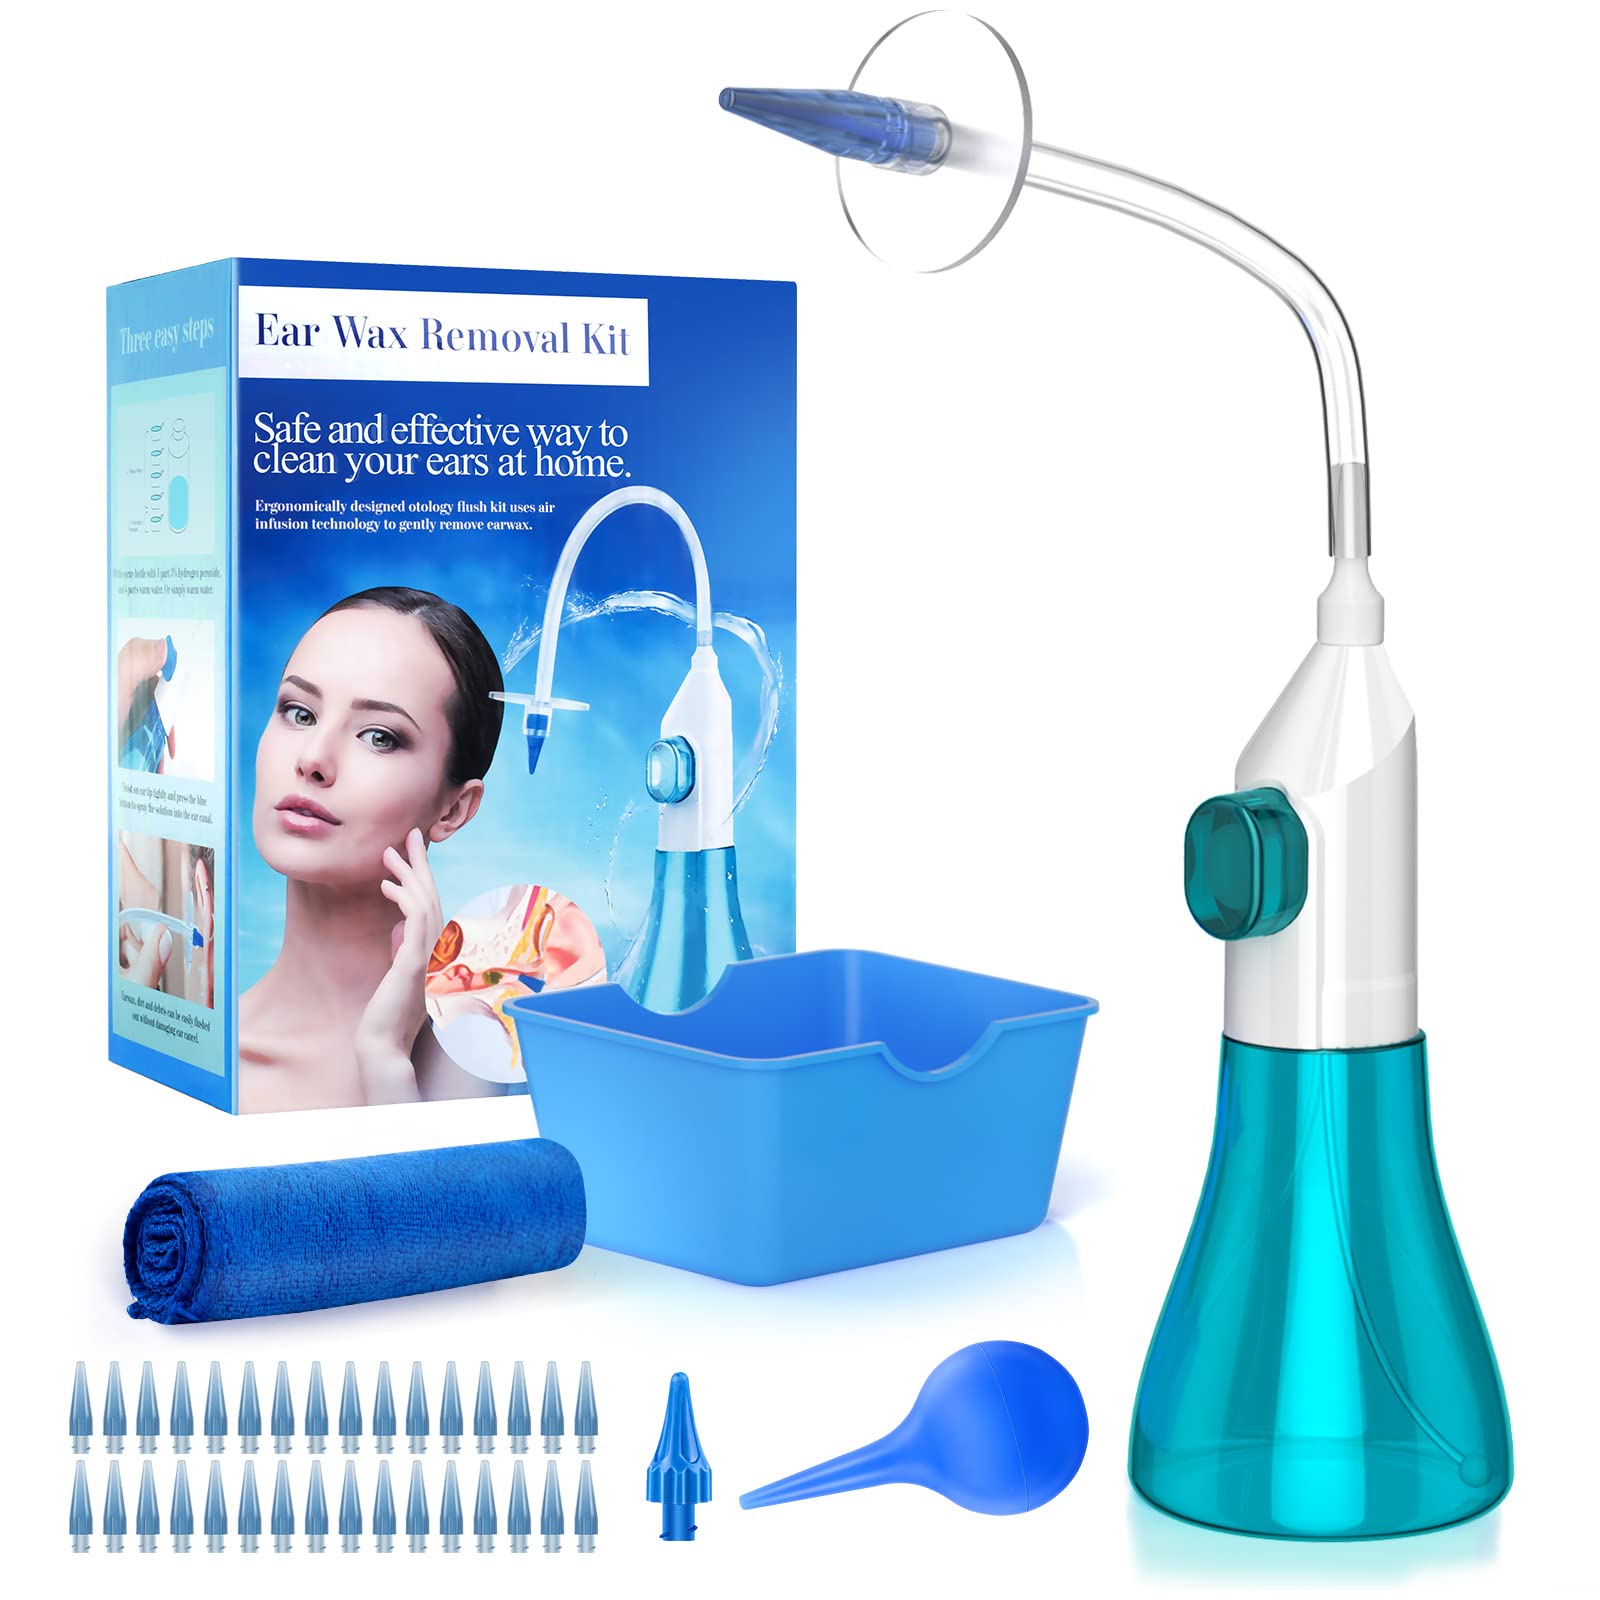 Qisxrovy Ear Wax Removal Tool, Ear Cleaning Kits Safe Ear Irrigation Kit Ear Flush Kit for Adults Kid, Ear Wax Washer Device Easy to Operate, Includes